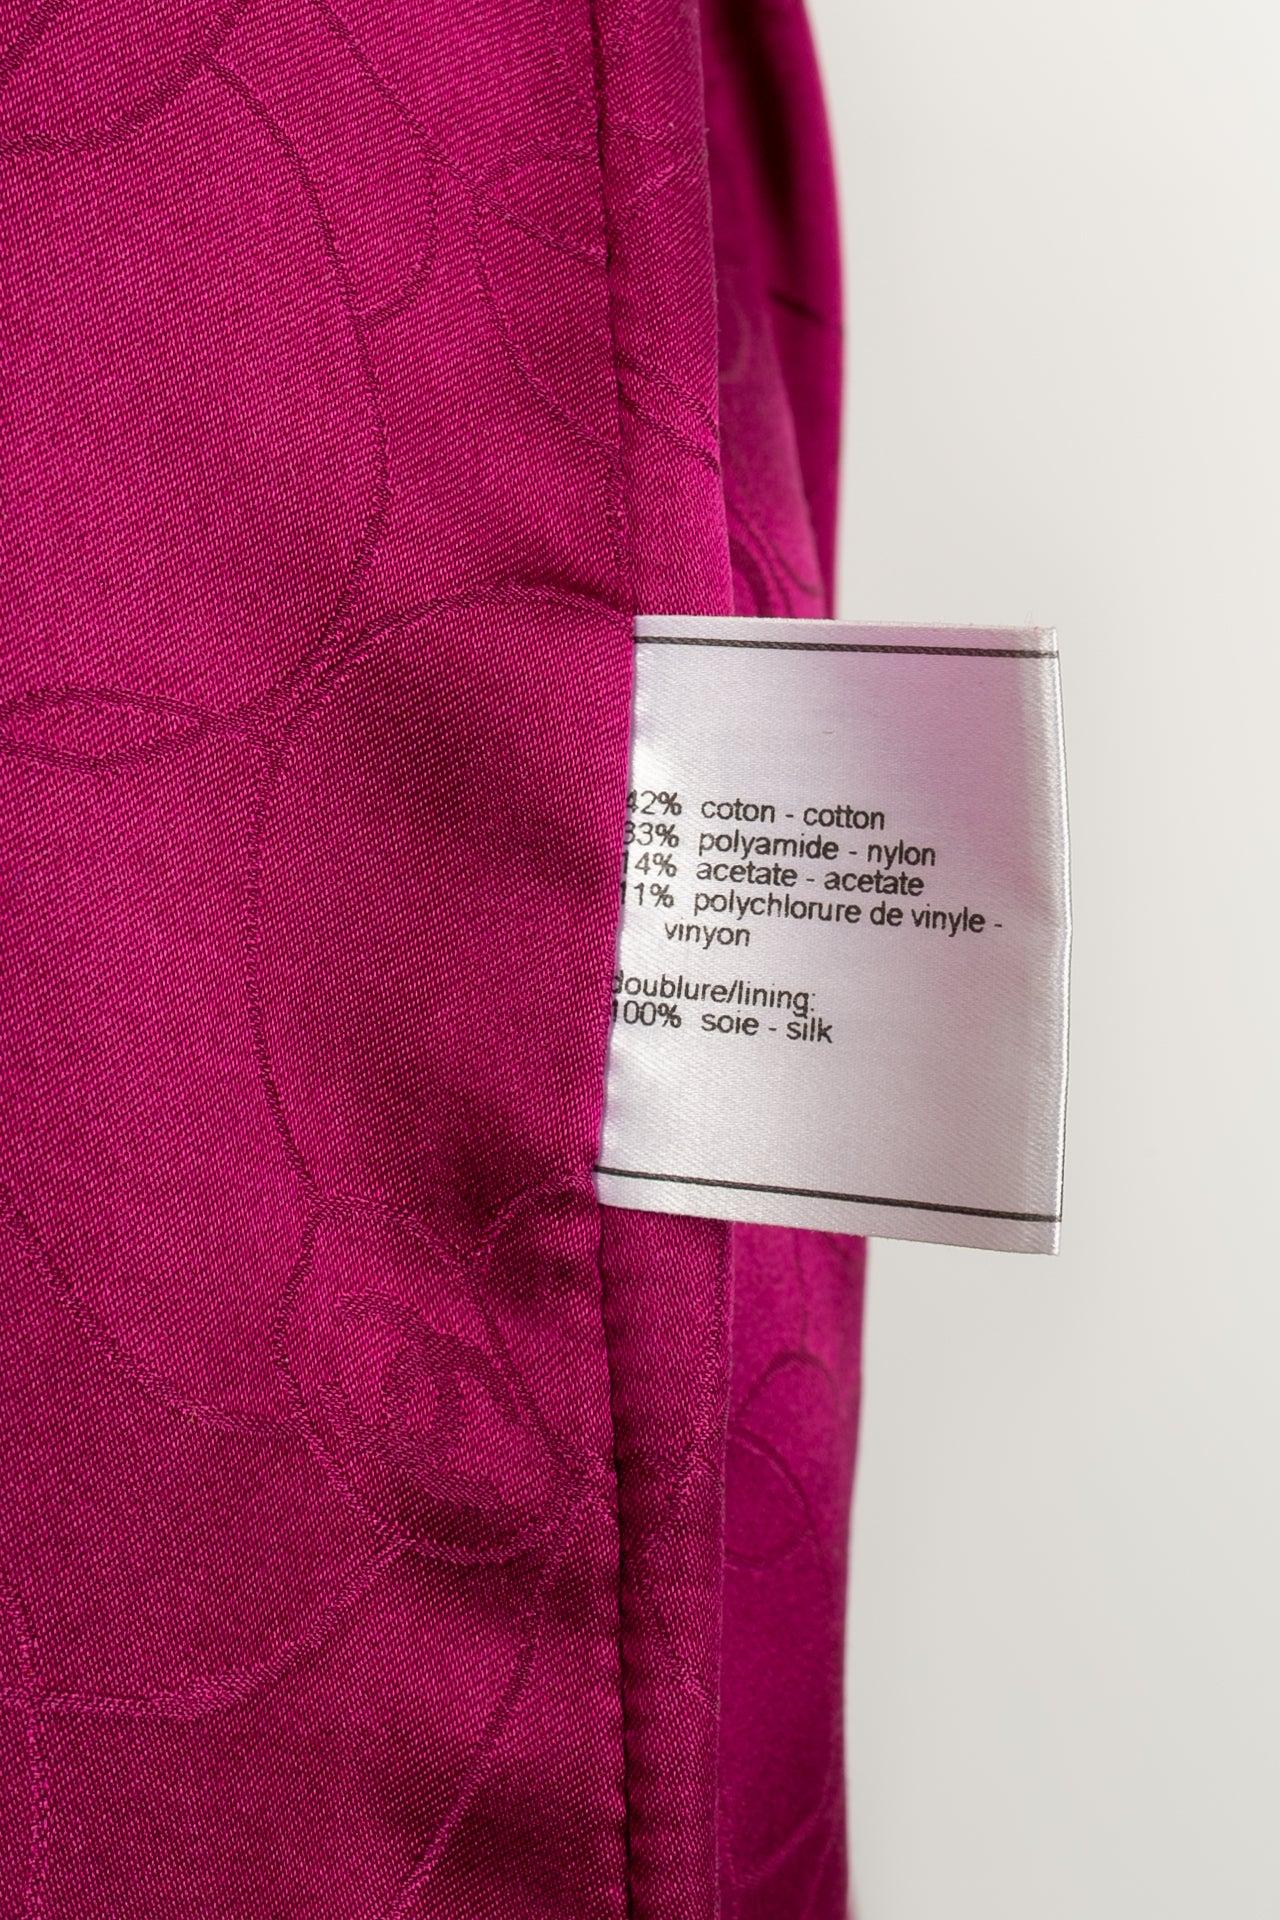 Chanel Purple Cotton Jacket Sewn with Sequins 4